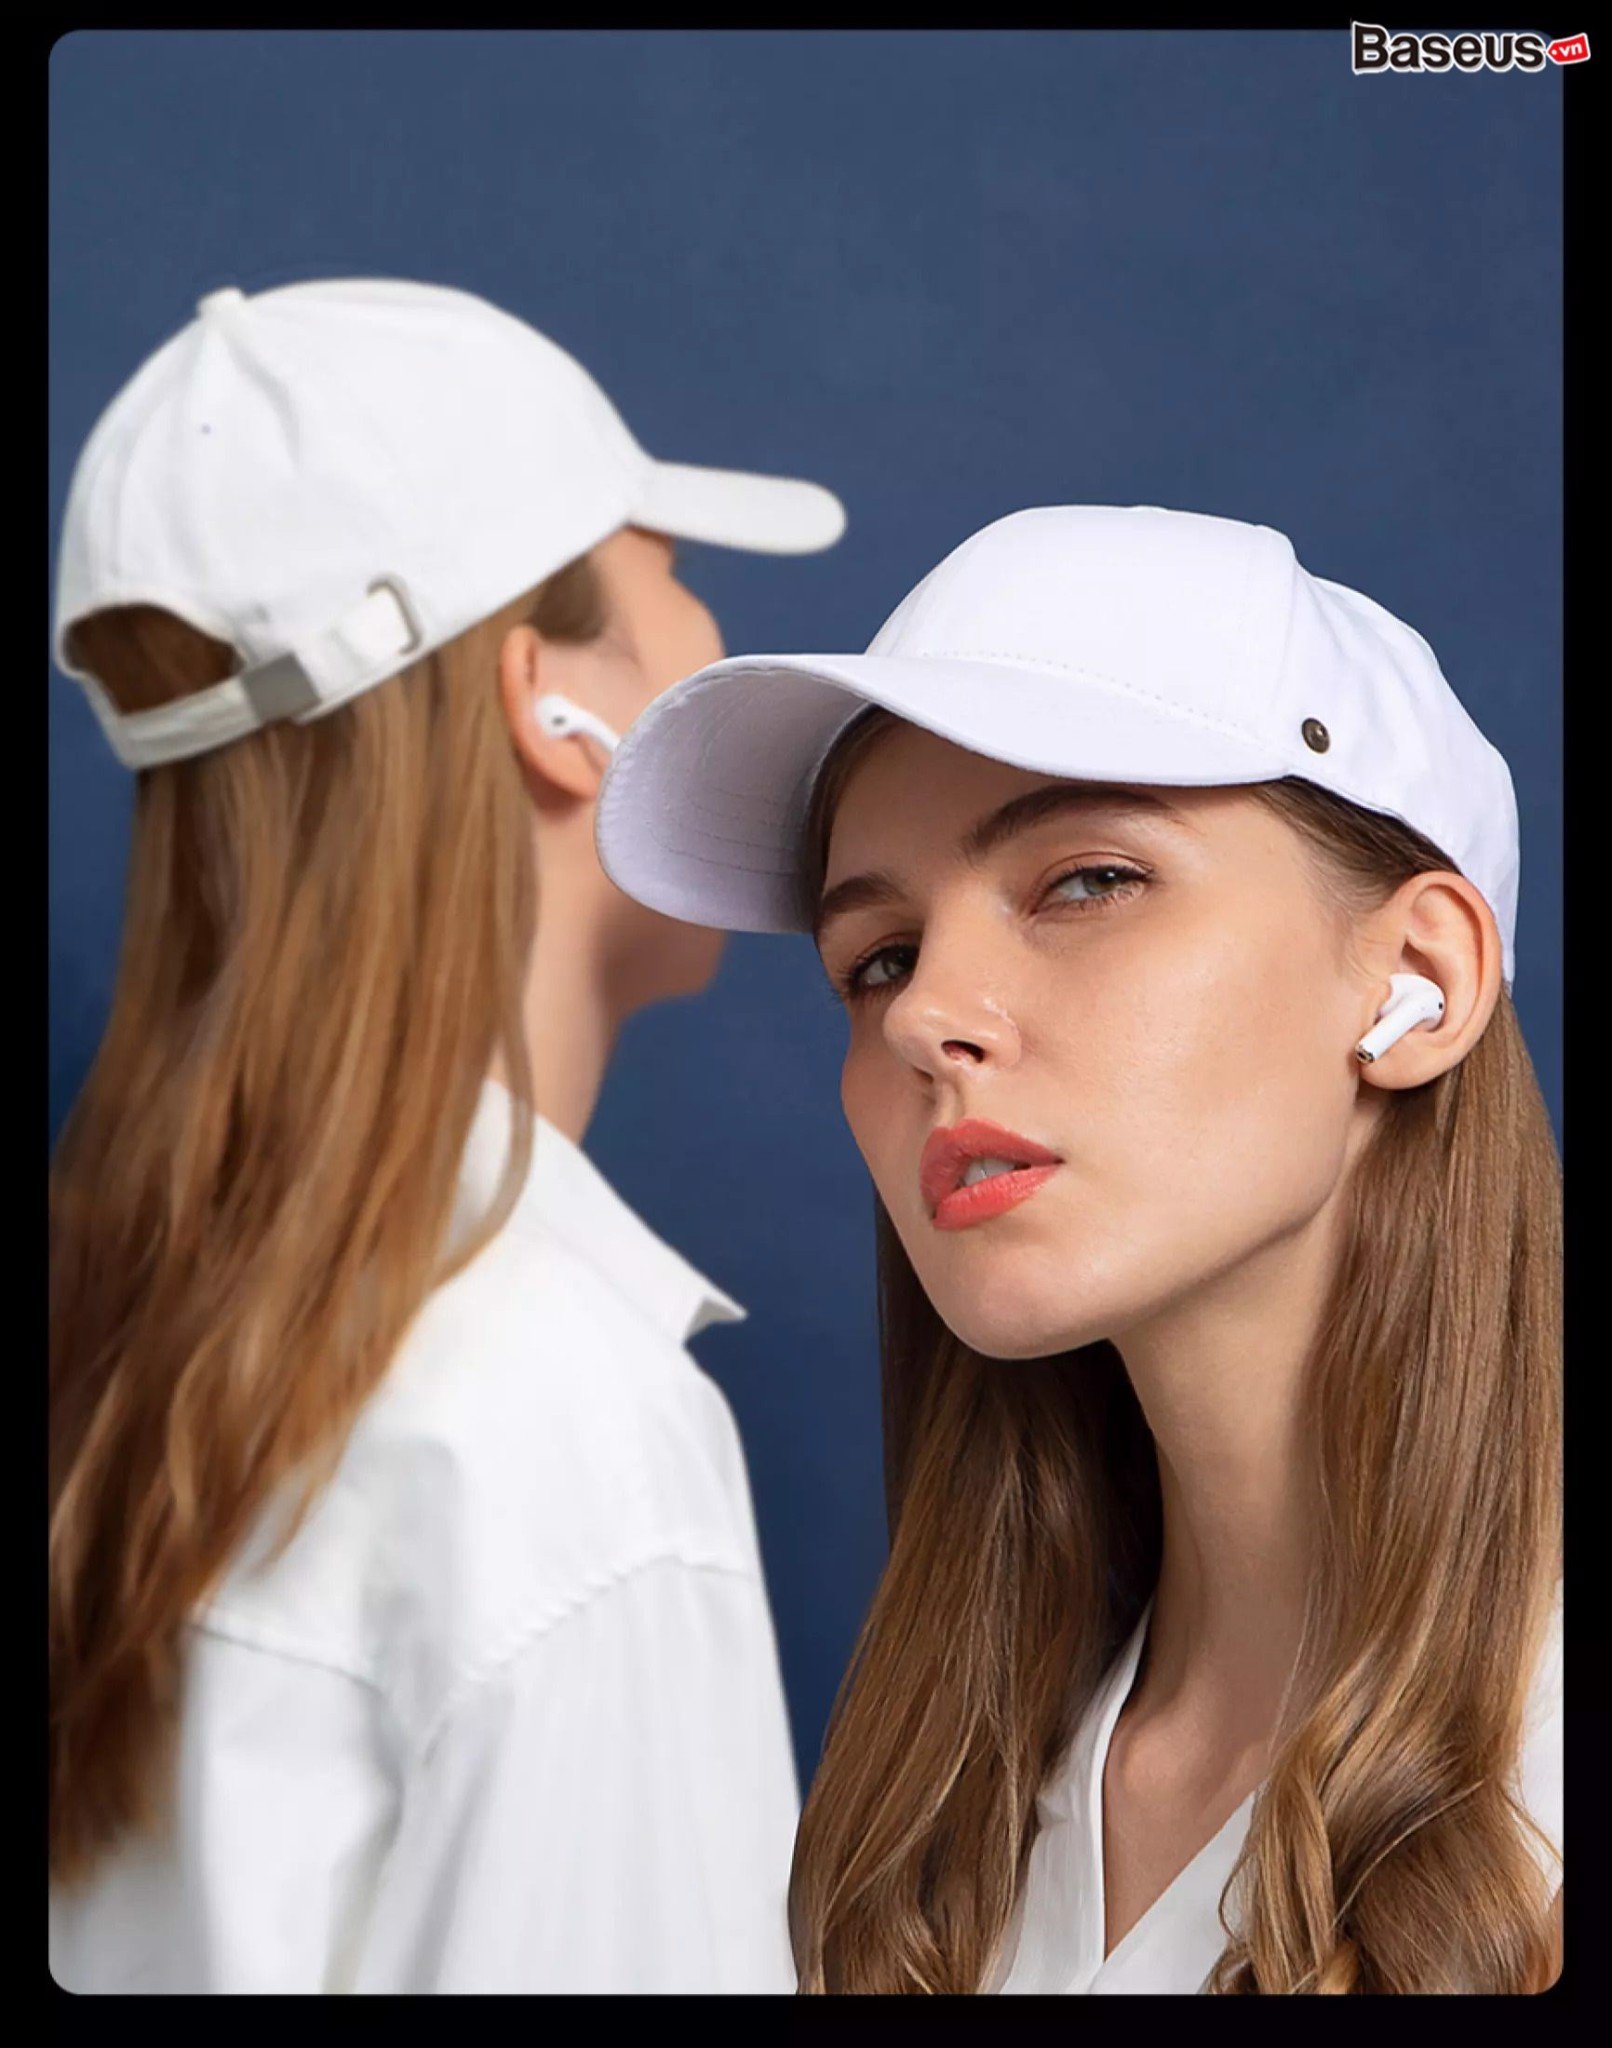 Tai nghe Bluetooth Baseus Encok W3 TWS (Bluetooth 5.0, 4h continuously listen, Noise reduction, IP55, True Wireless Earbuds )